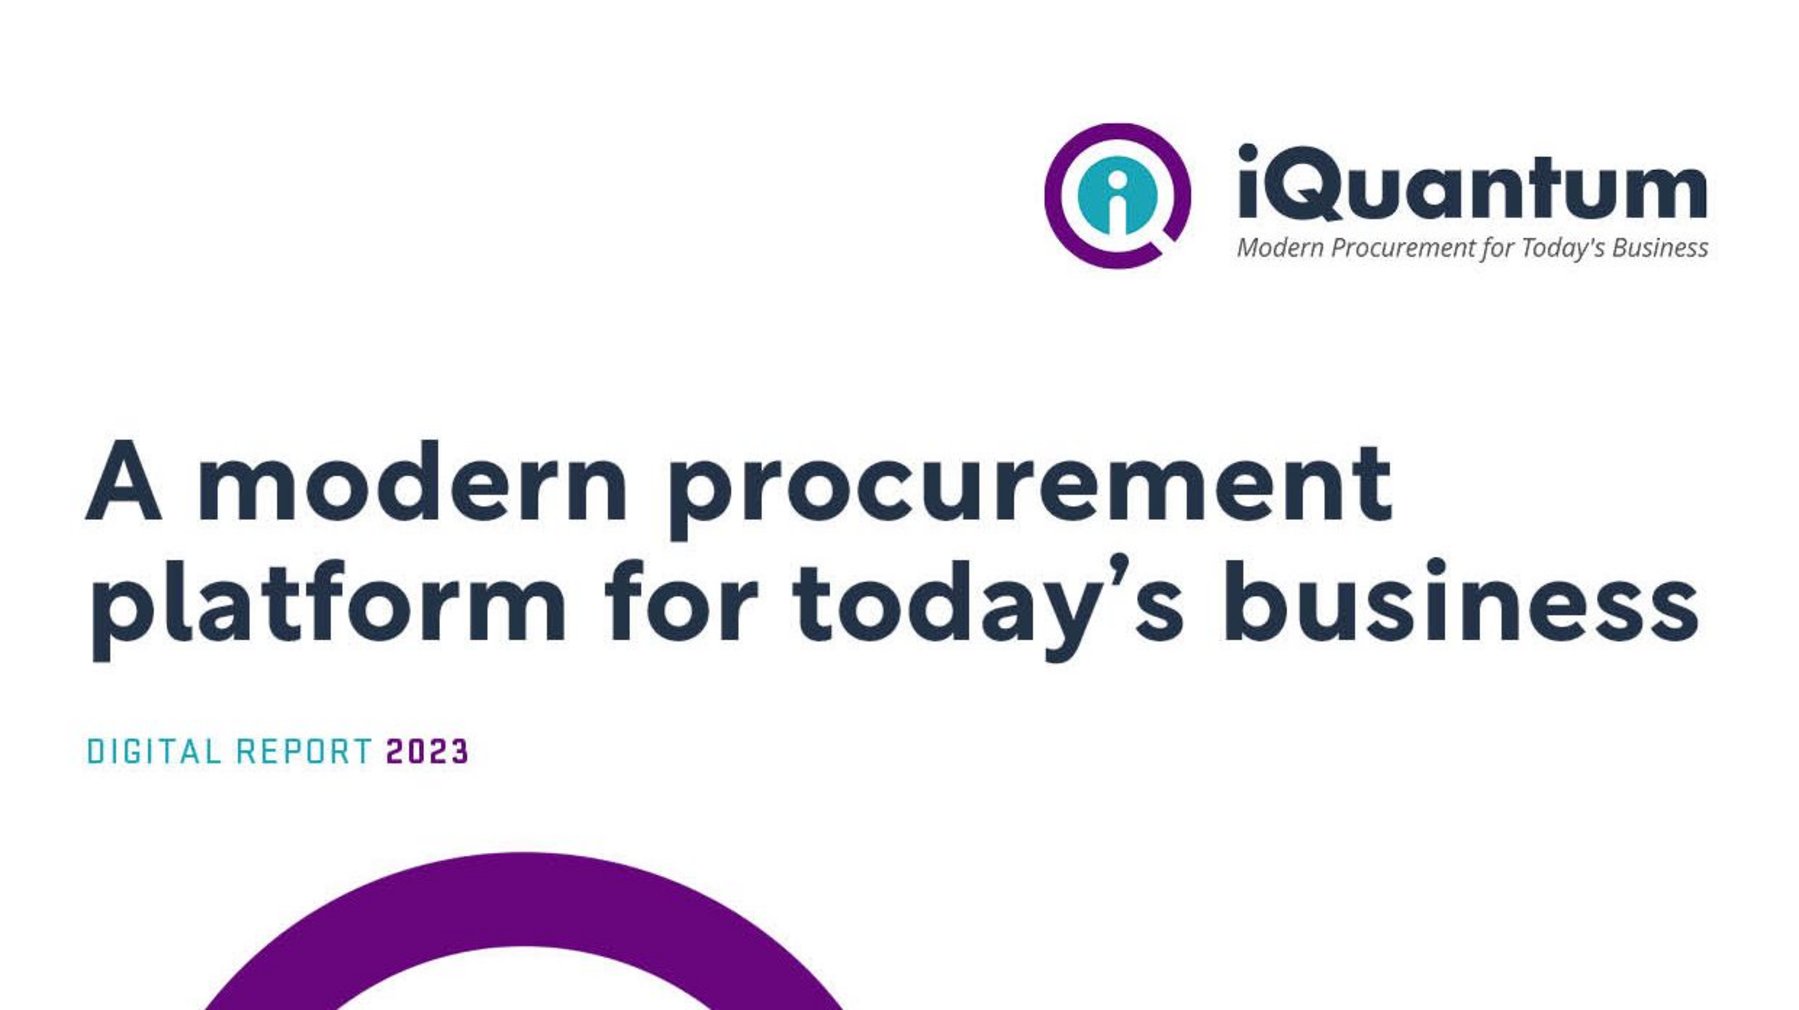 iQuantum: A Modern Procurement Platform for Today's Business